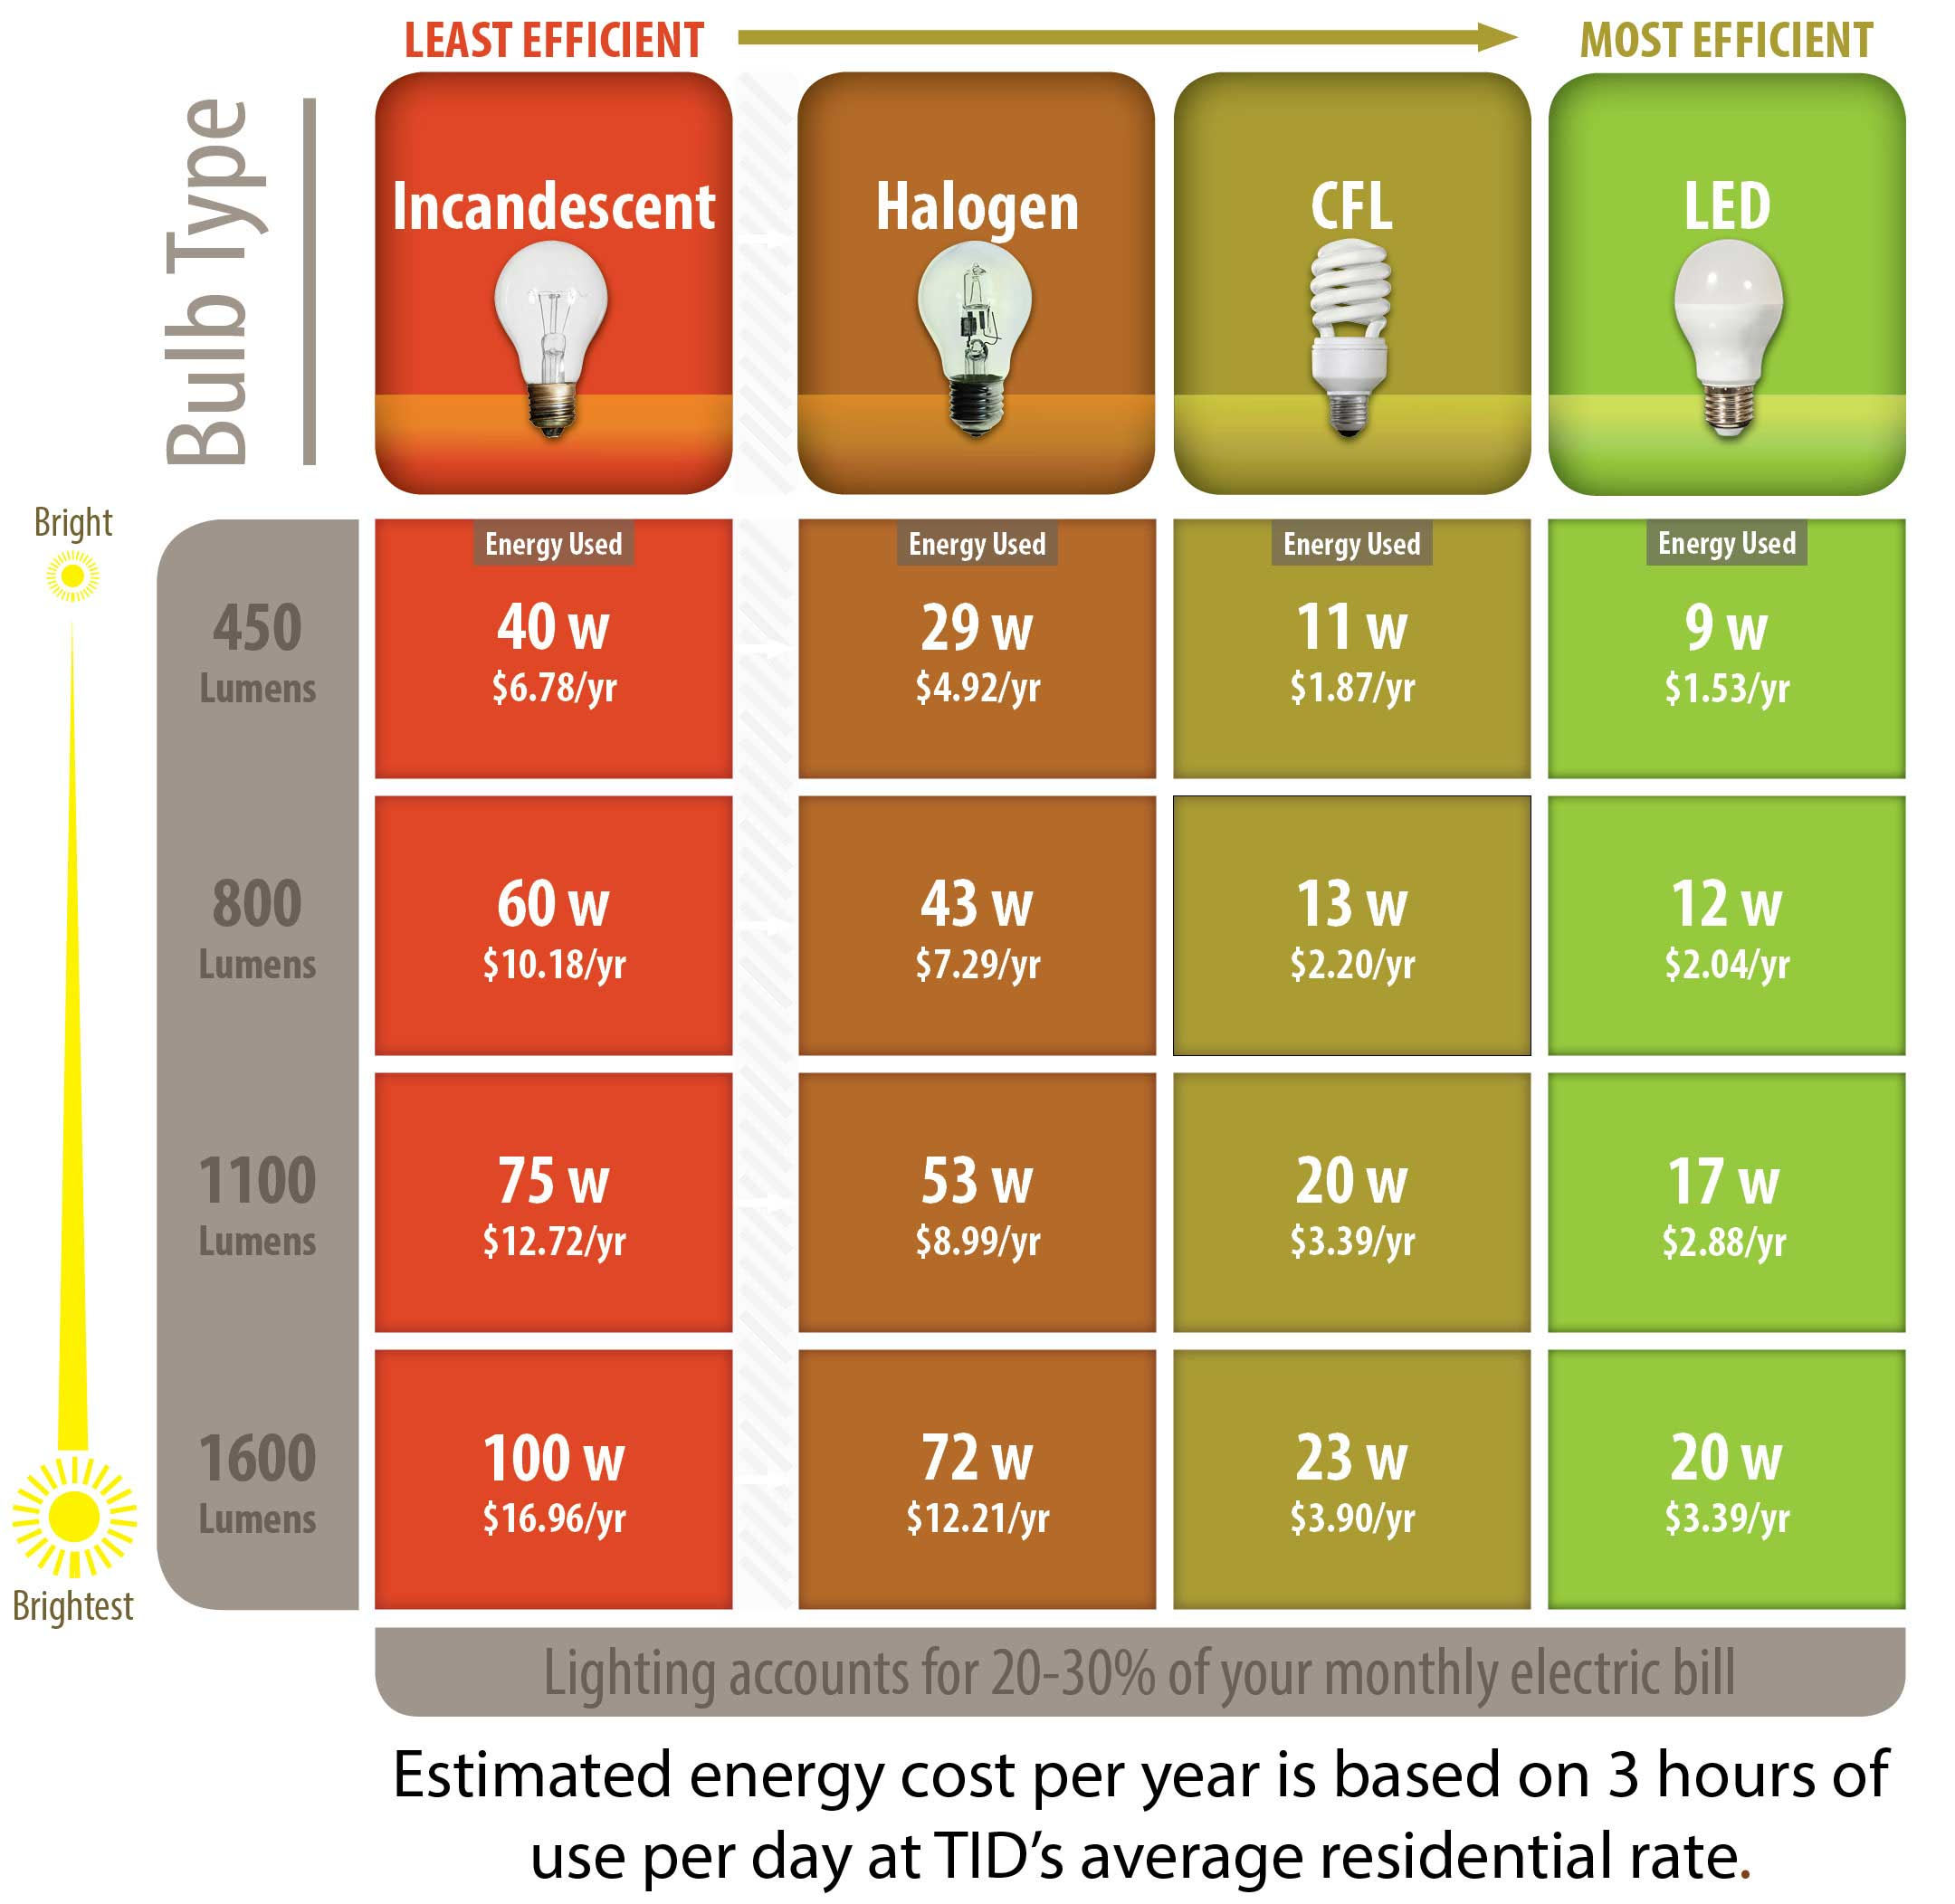 LED Bulbs Save Energy Money And Are Eligible For A Rebate From TID